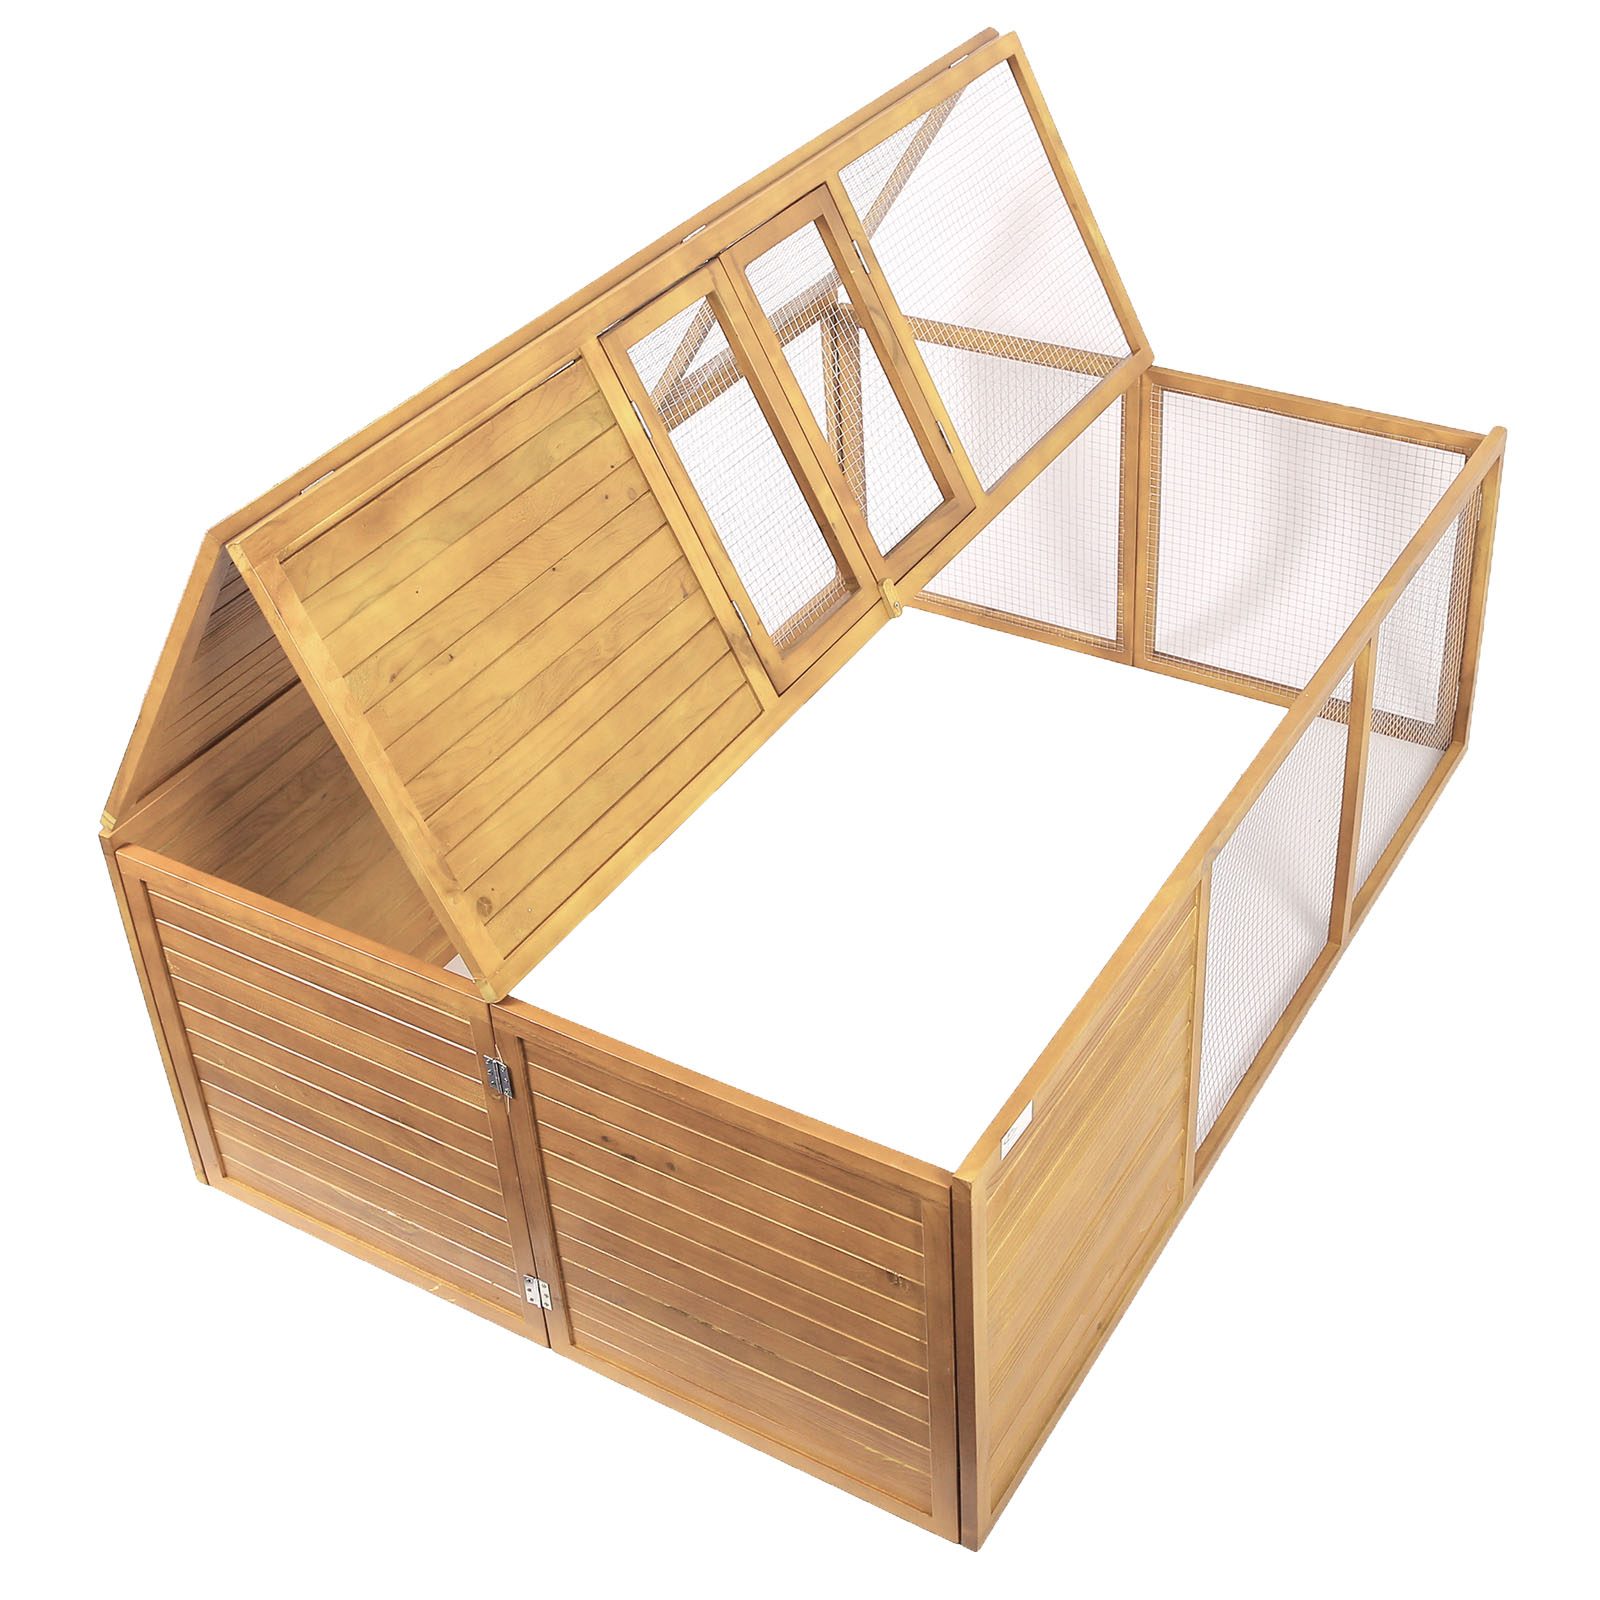 Rabbit Hutch foldable Outdoor Enclosure Guinea Pig Small Animal